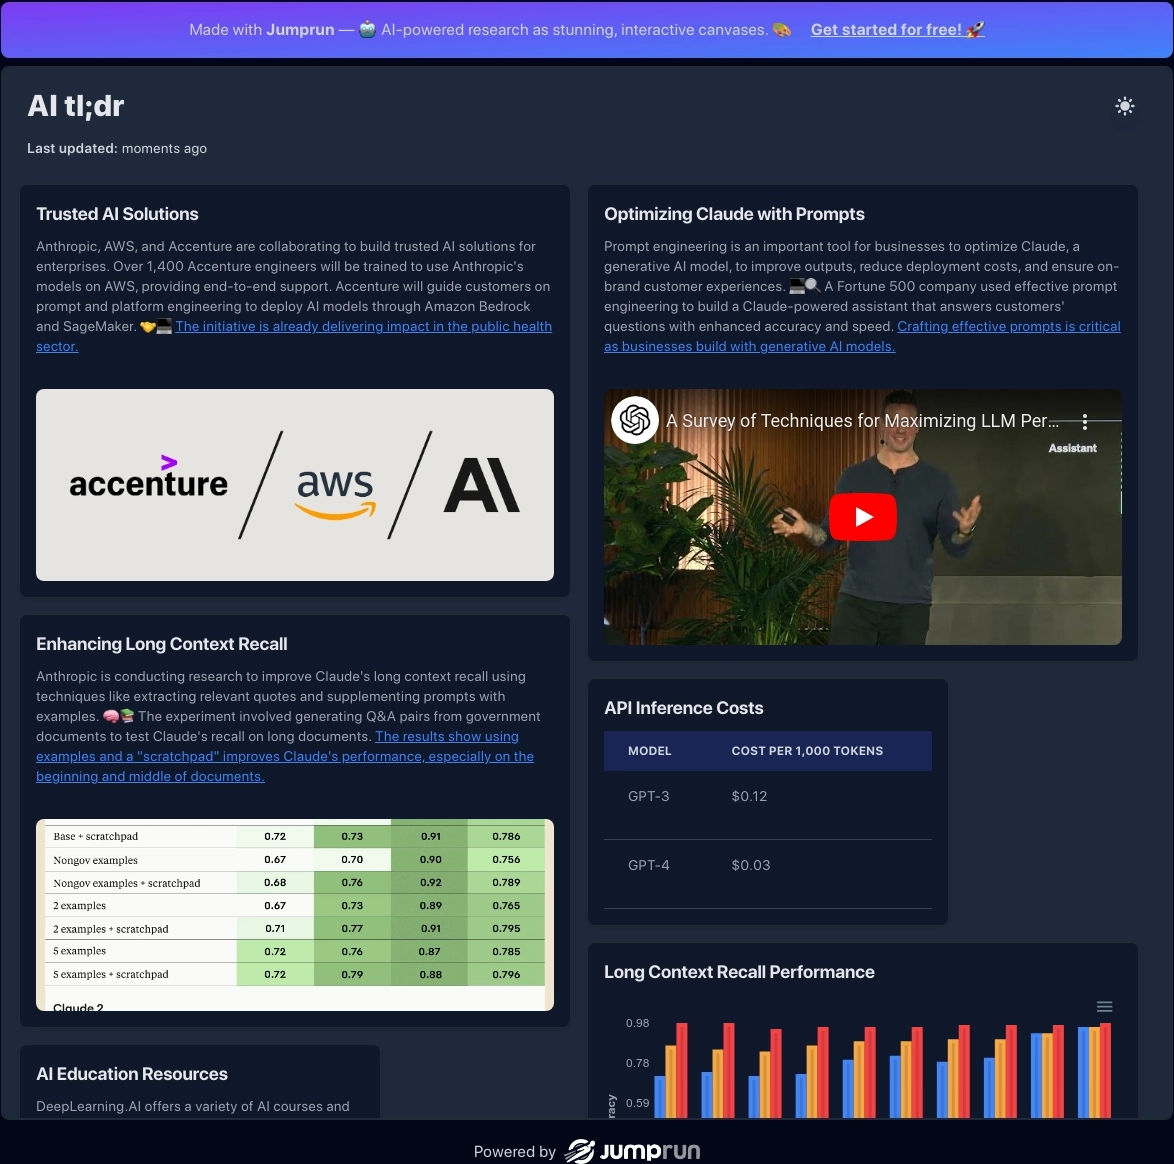 Stay up-to-date with the latest AI developments, including Anthropic's research on improving Claude's long context recall, OpenAI's enhancements to fine-tuning and custom models, and educational...